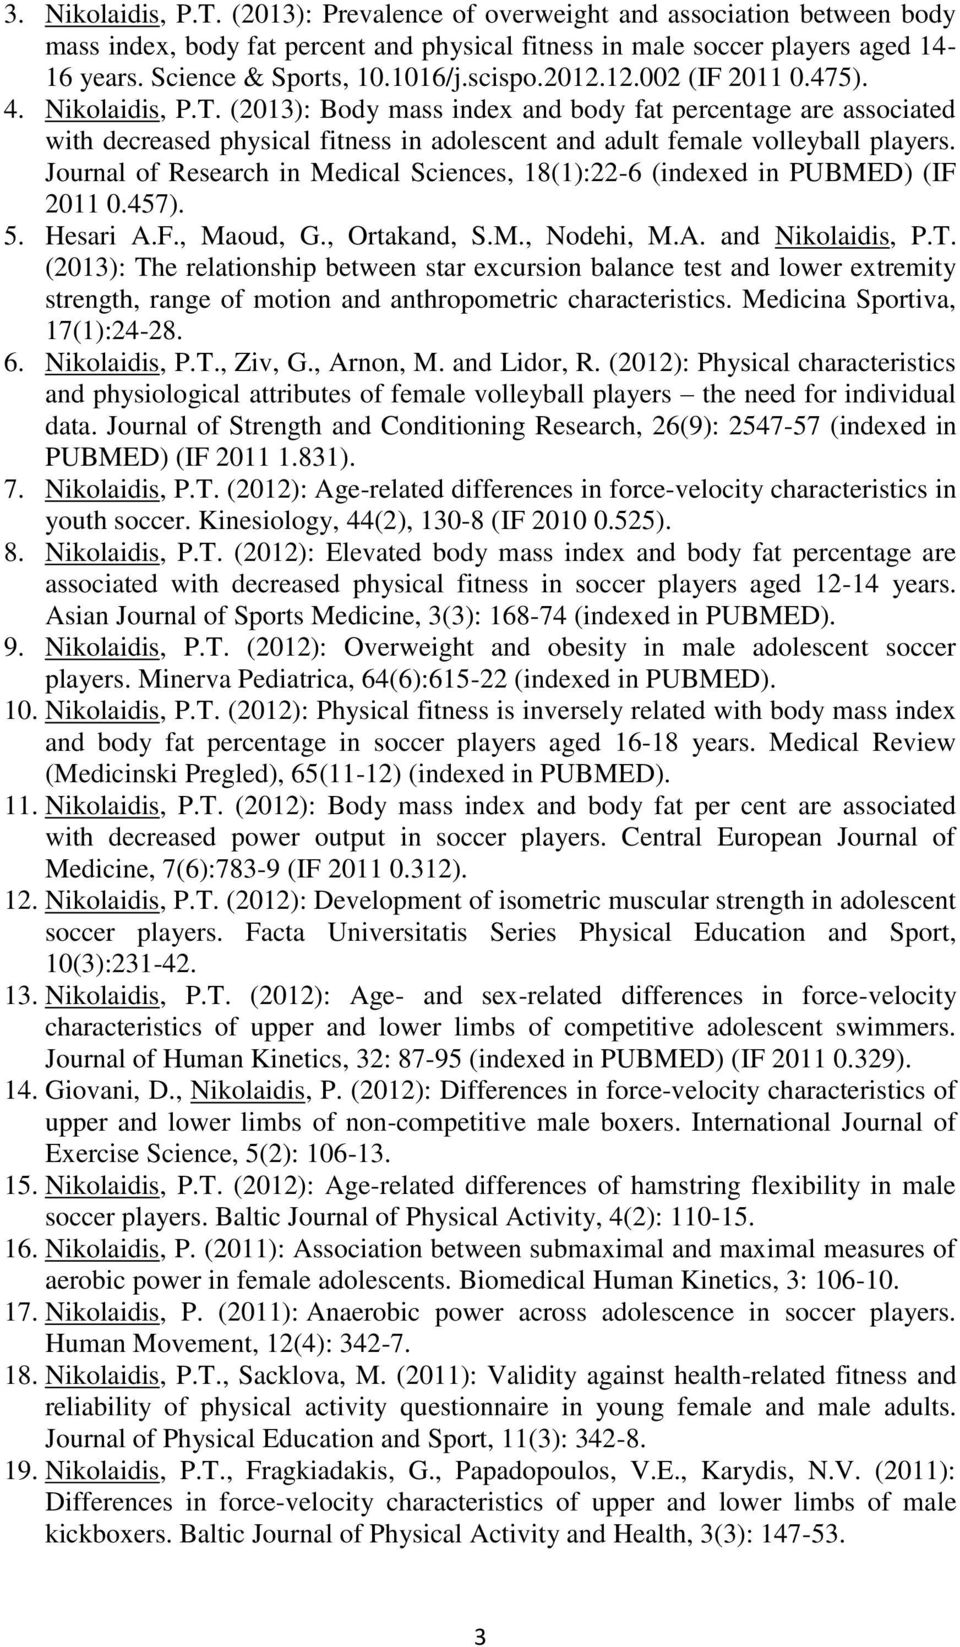 (2013): Body mass index and body fat percentage are associated with decreased physical fitness in adolescent and adult female volleyball players.